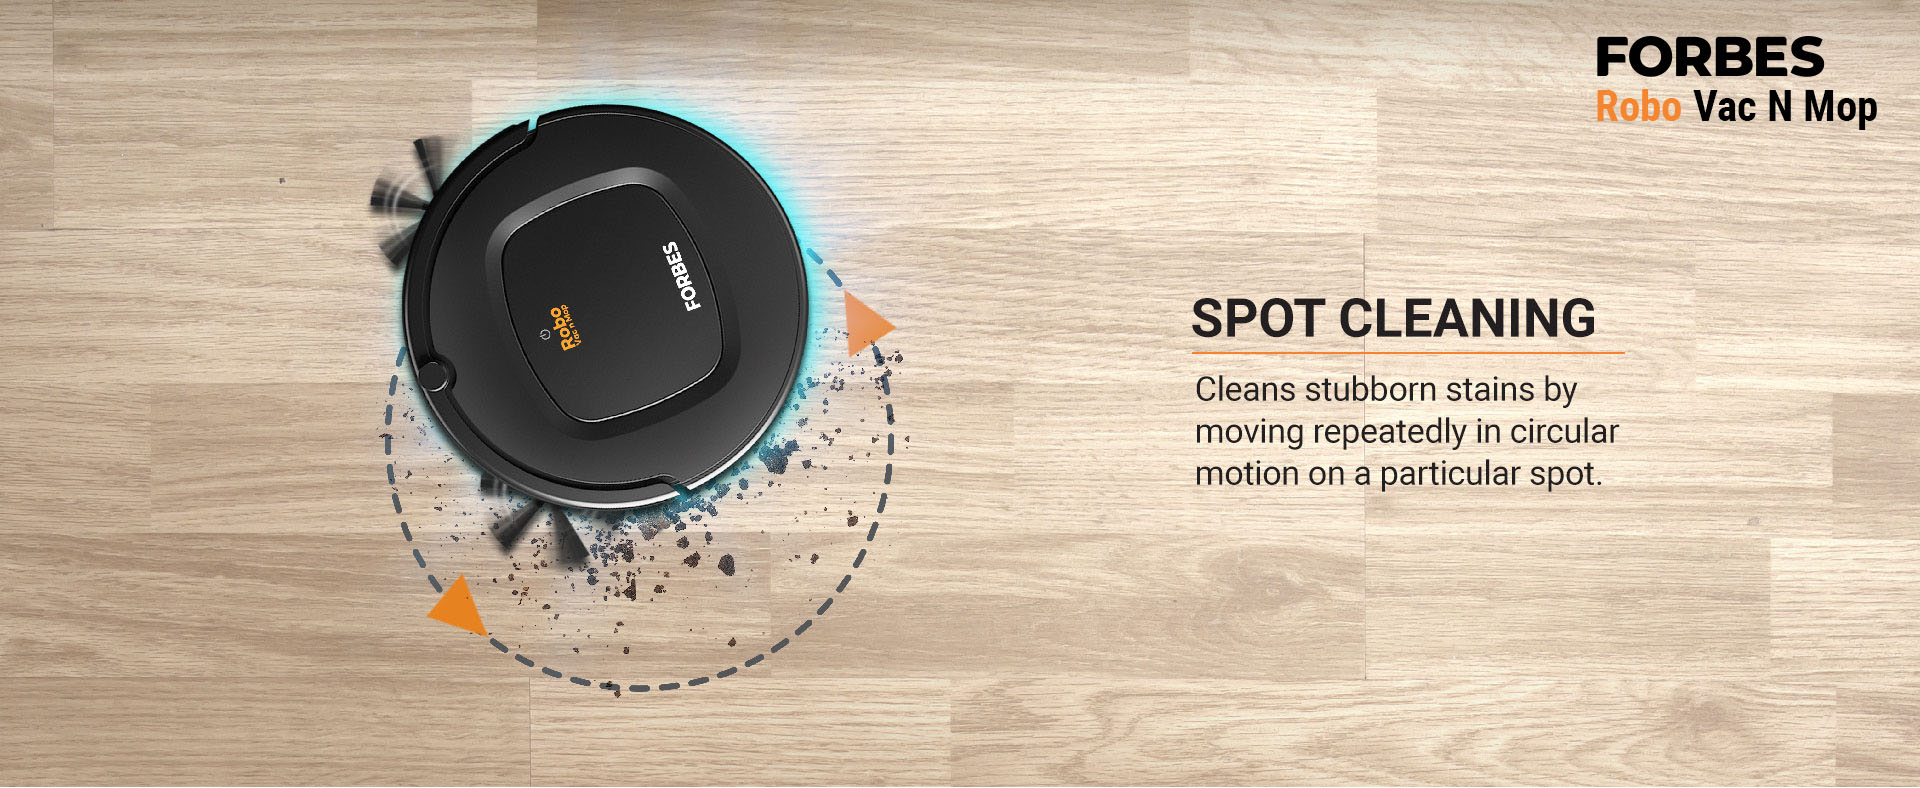 Cleans stubborn stains by moving repeatedly in circular motion on a particular spot.